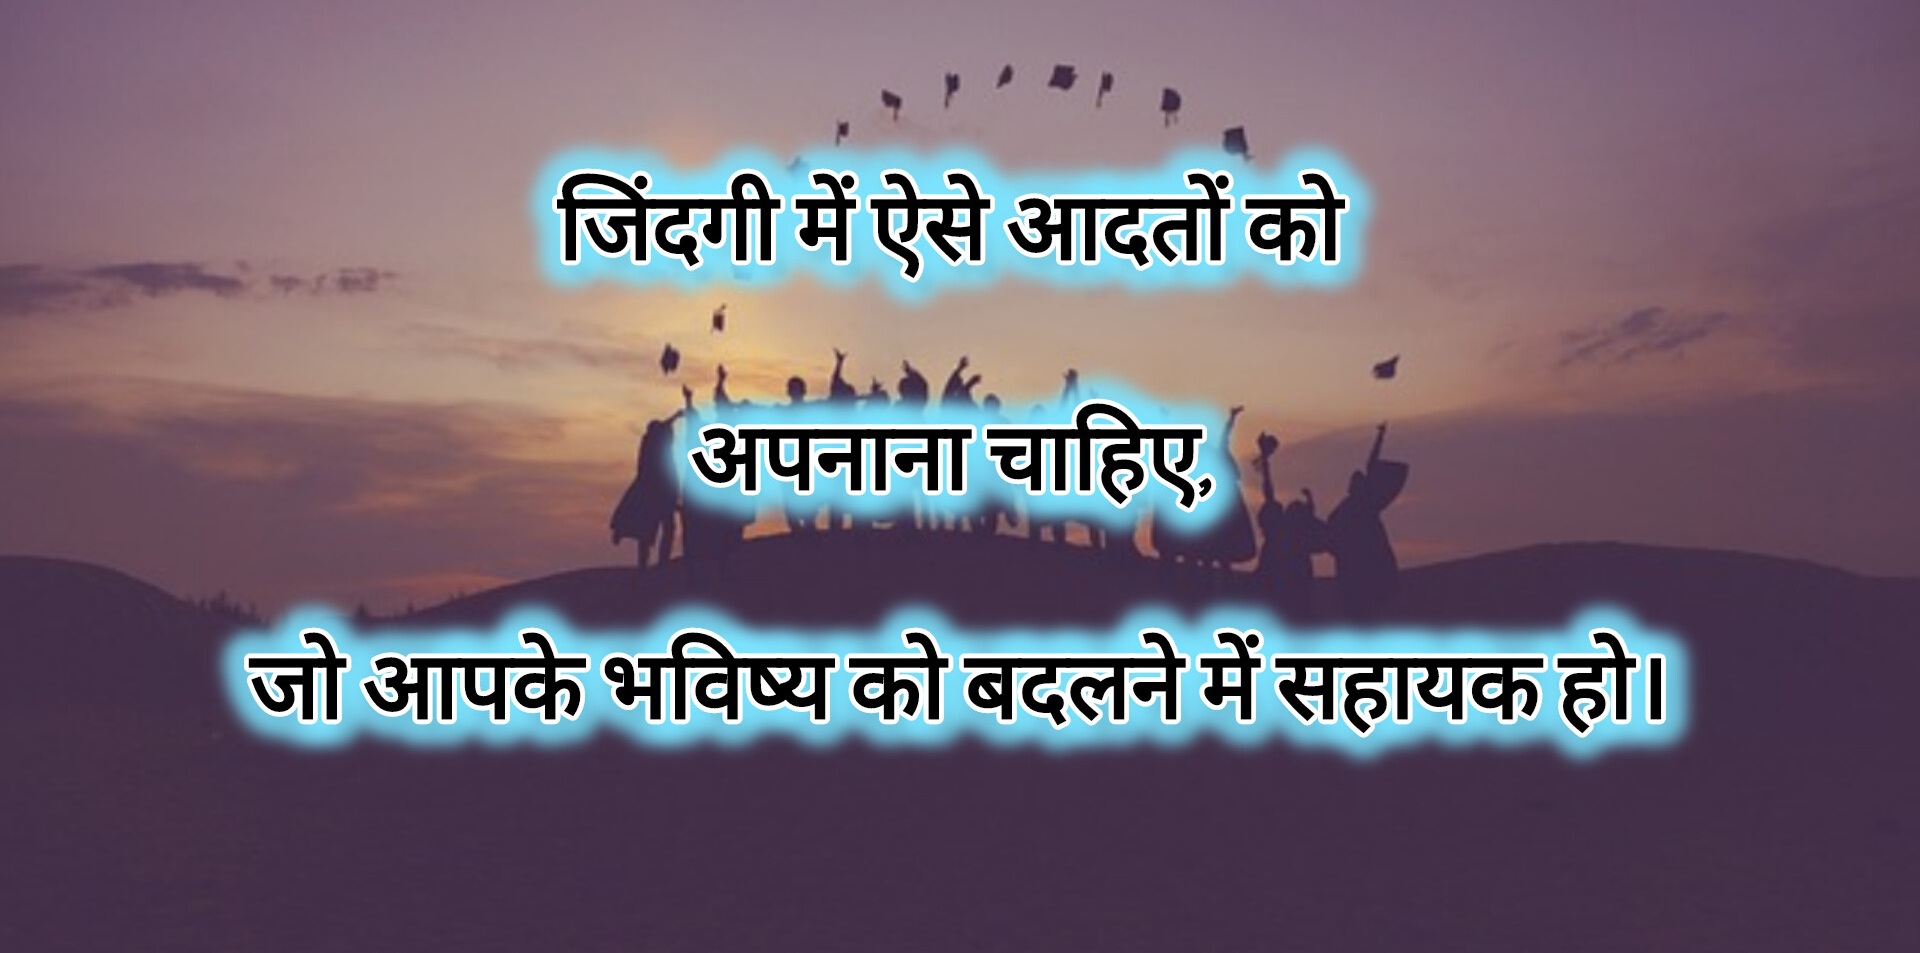 Hindi thoughts for students